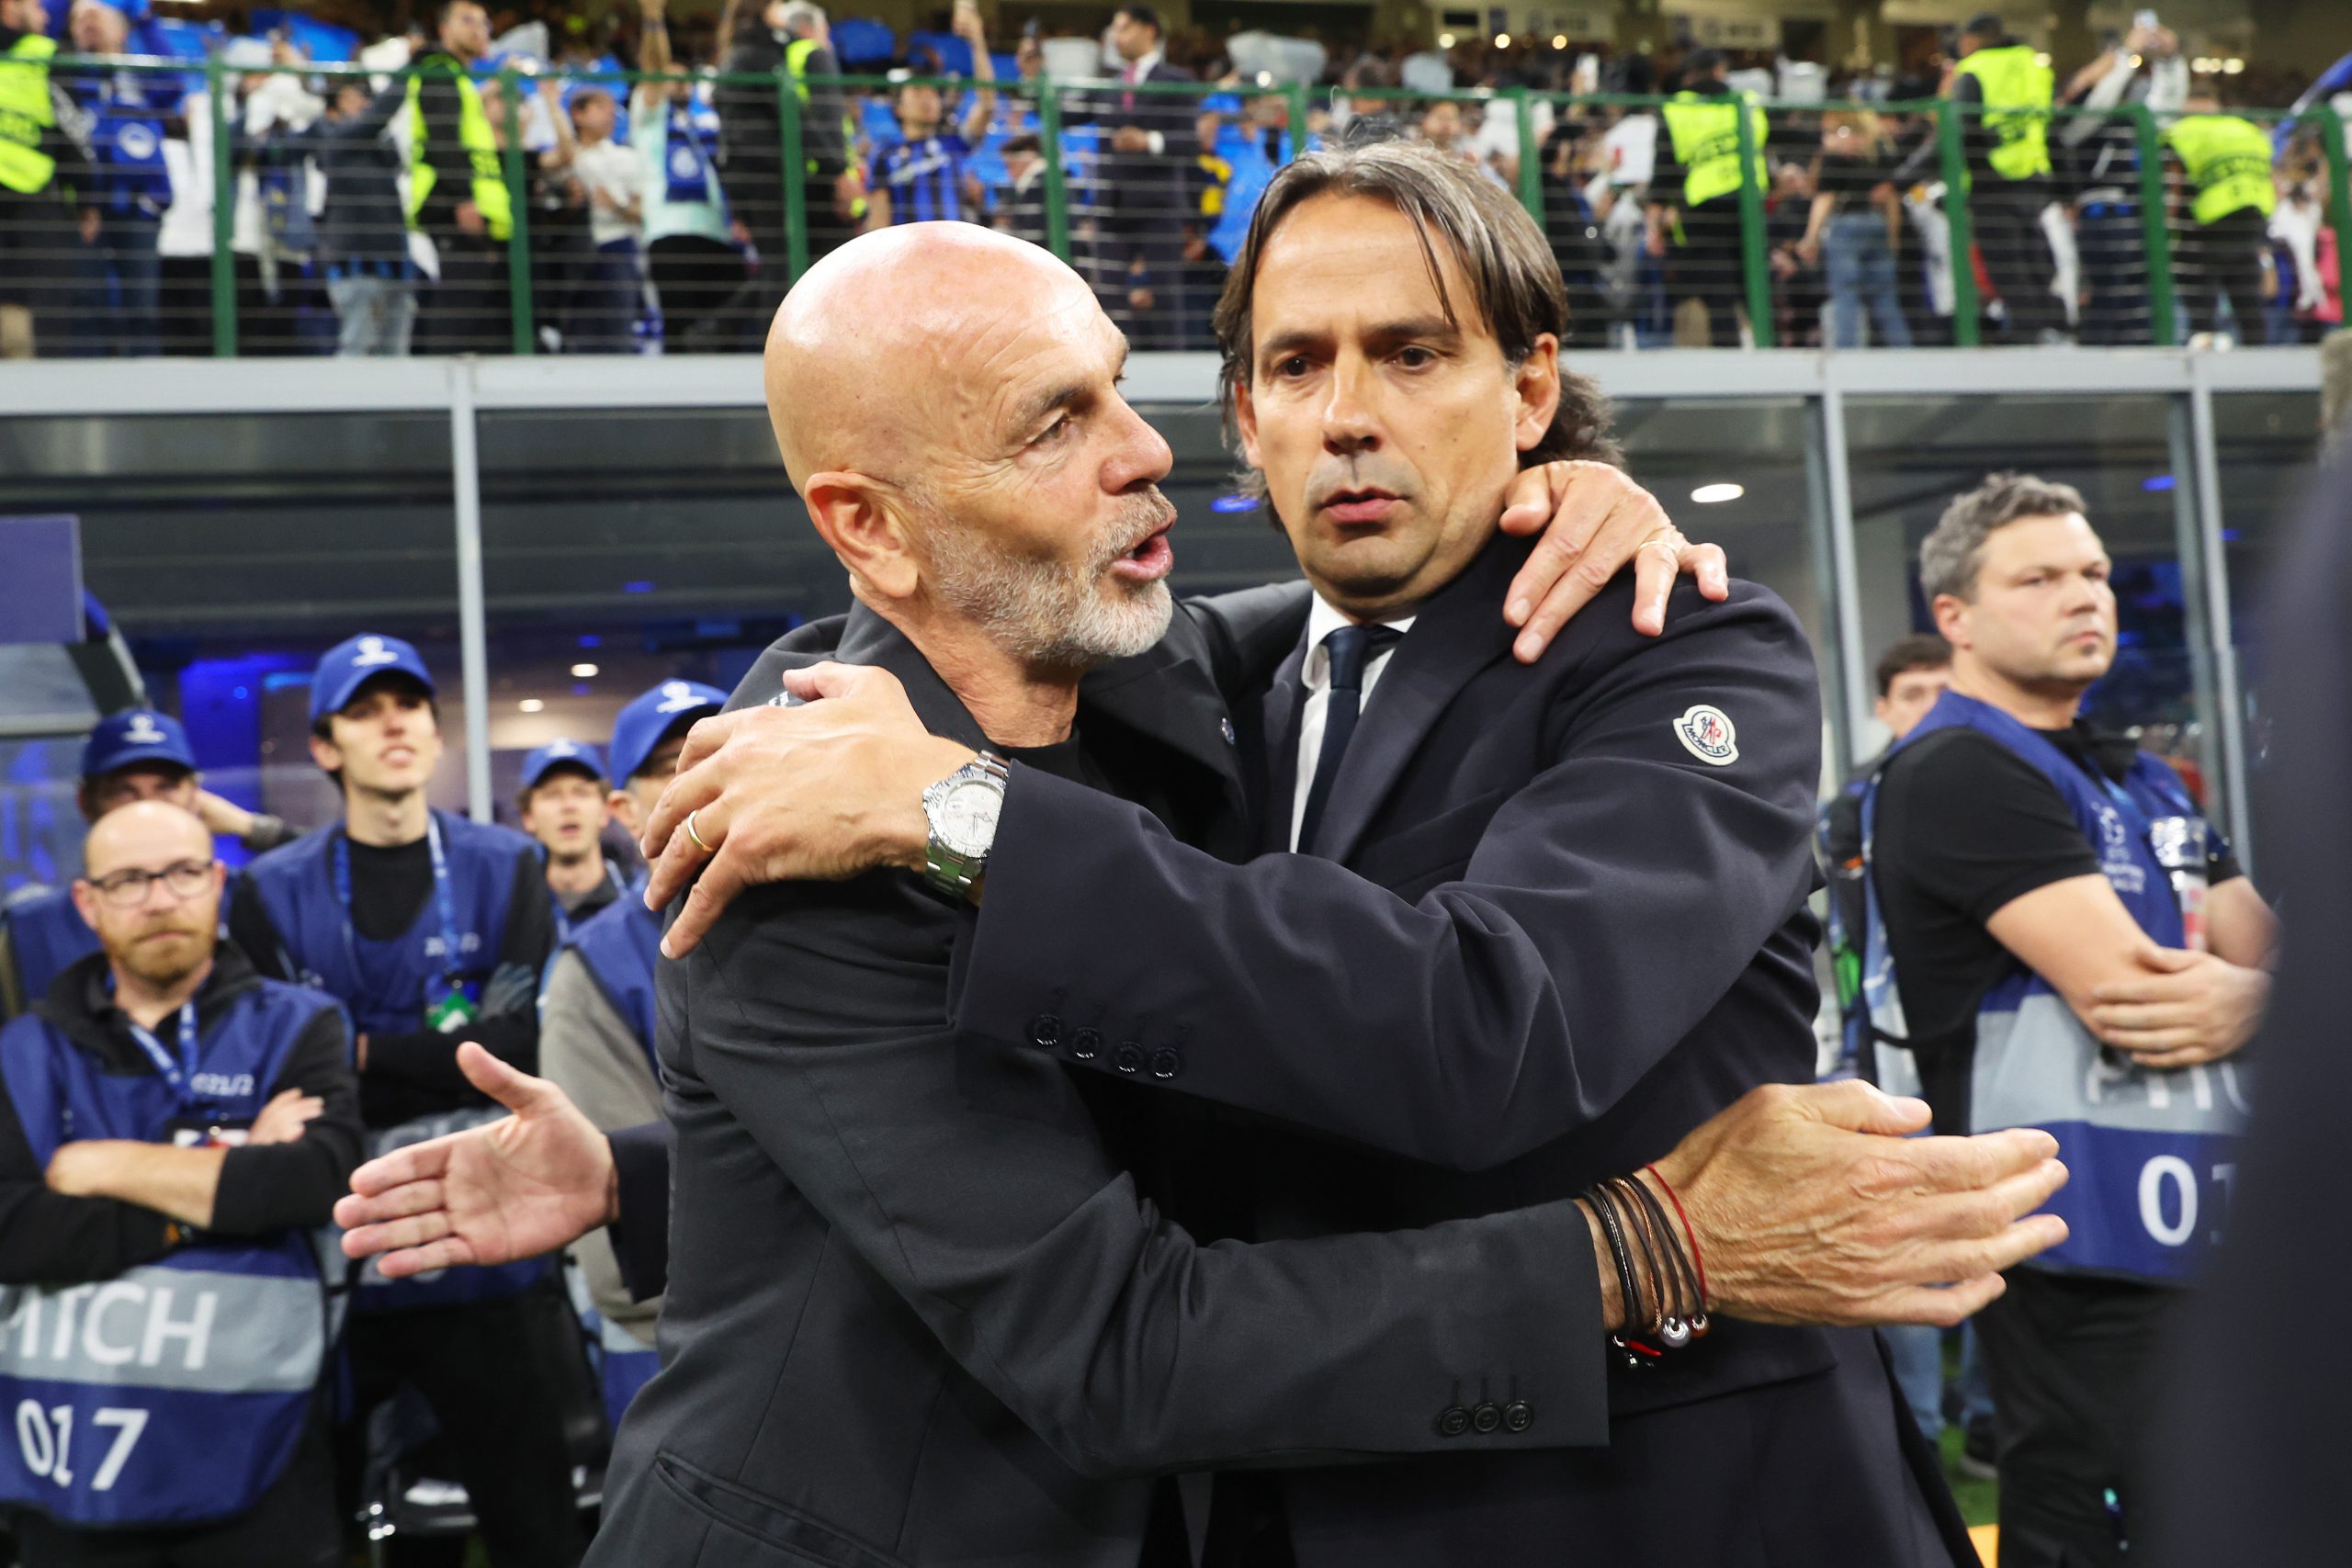 Stefano Pioli e Simone Inzaghi in Inter-Milan di Champions League (Photo by Alexander Hassenstein/Getty Images via OneFootball)